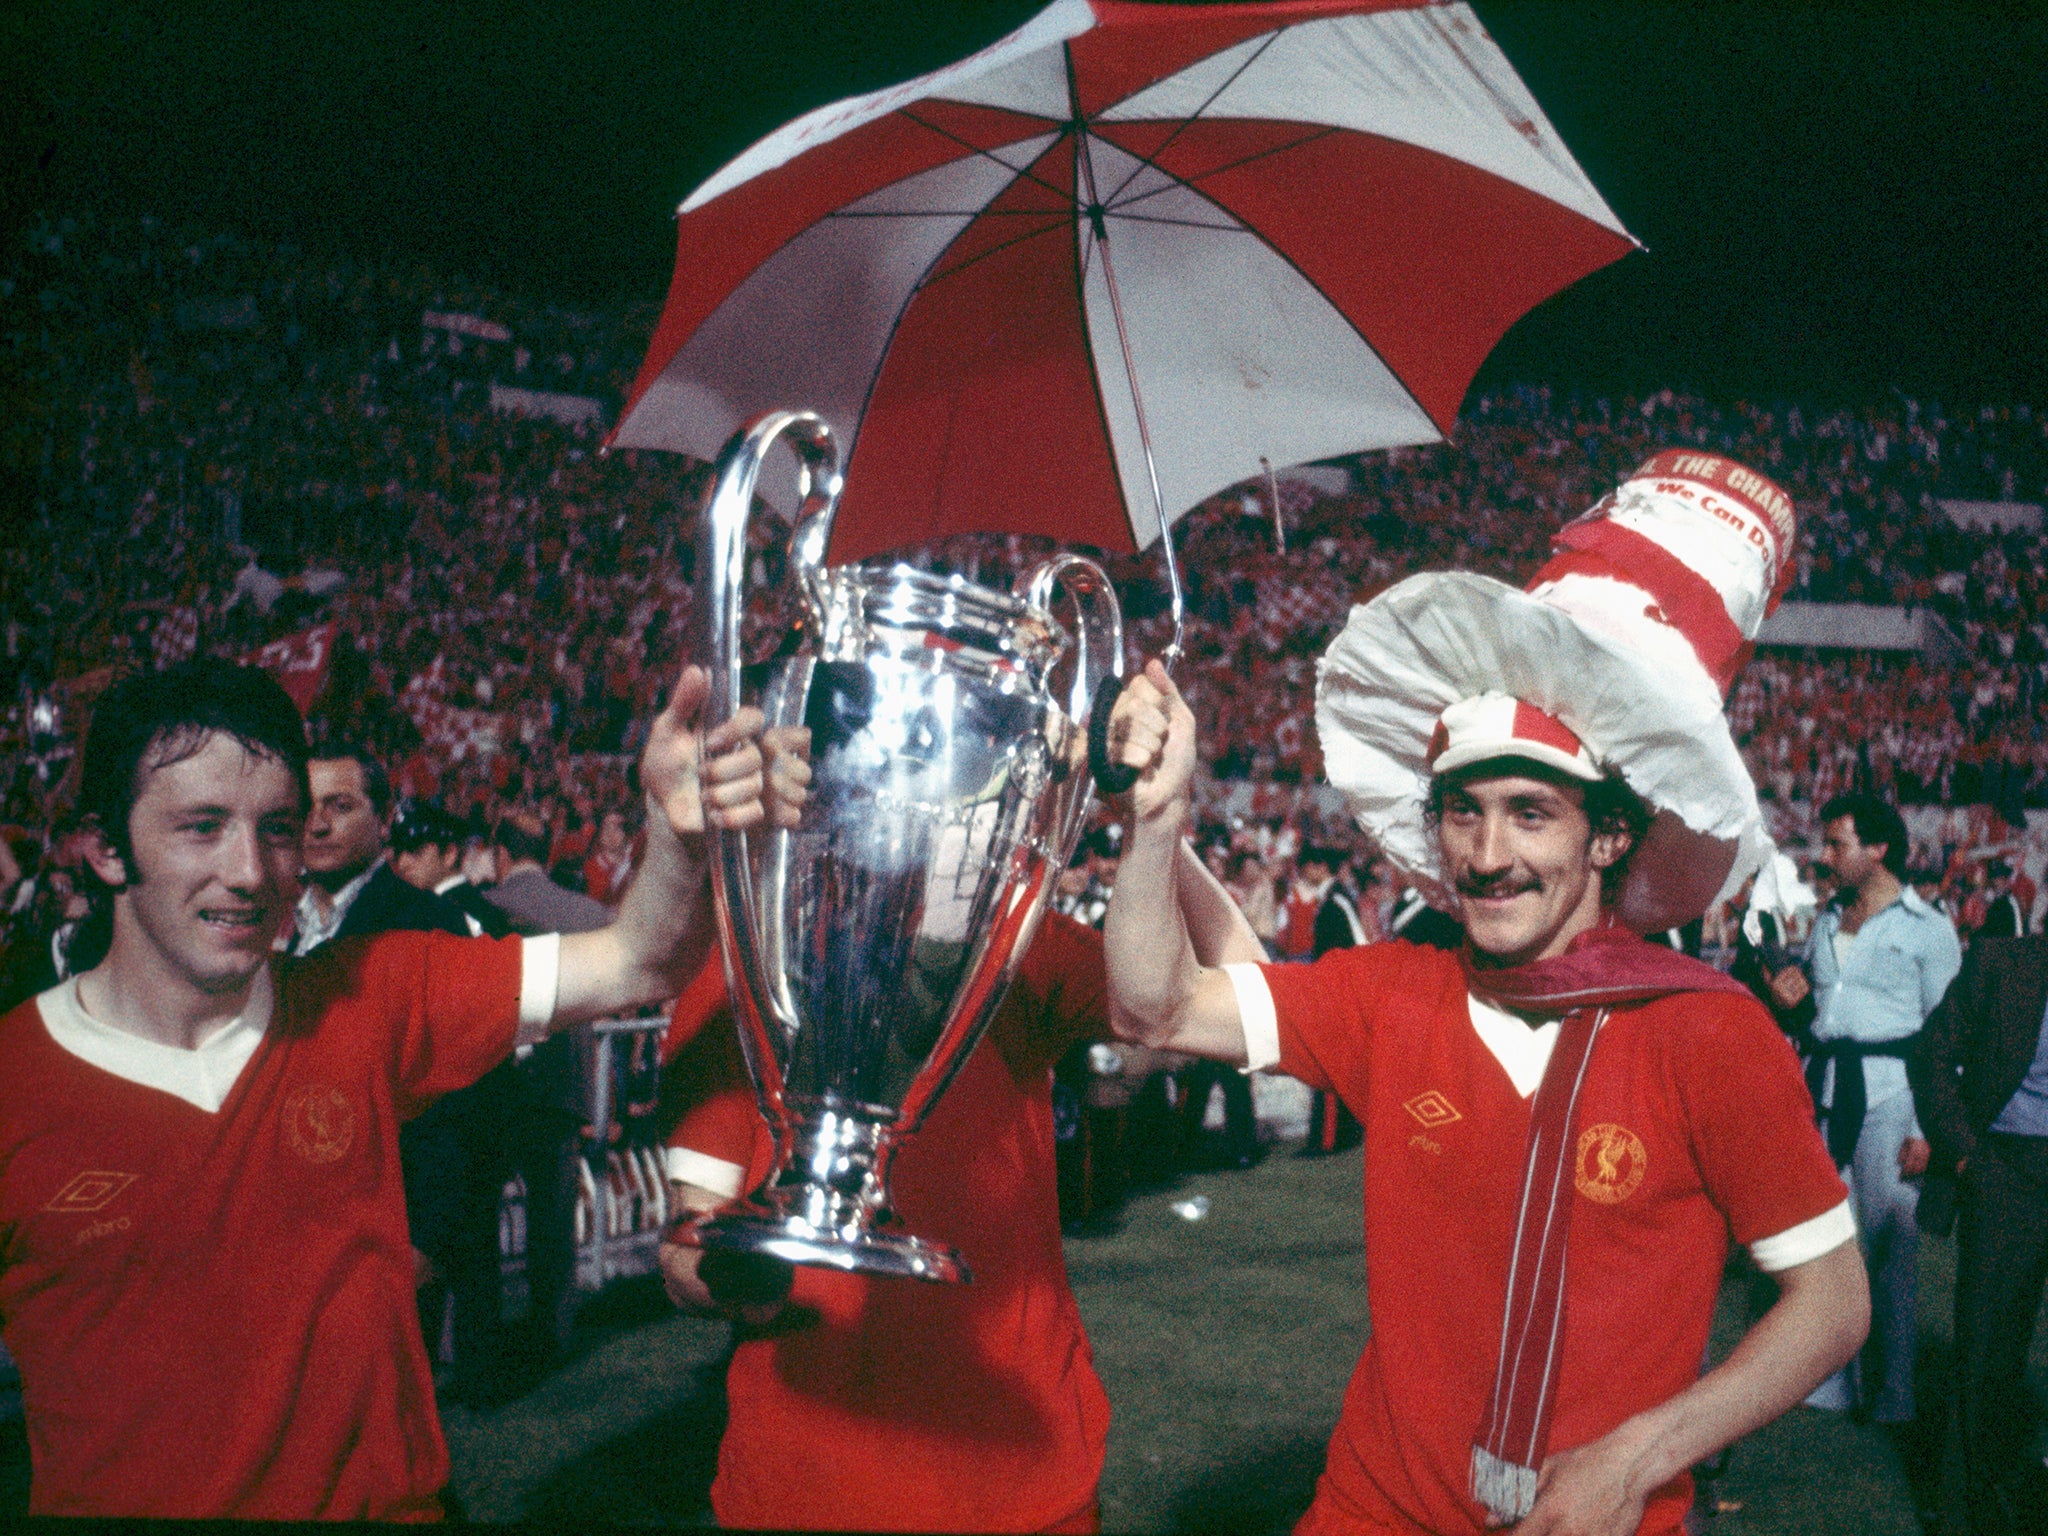 Terry McDermott inspired Liverpool to European Cup glory in 1977 but it came with his own personal sacrifice